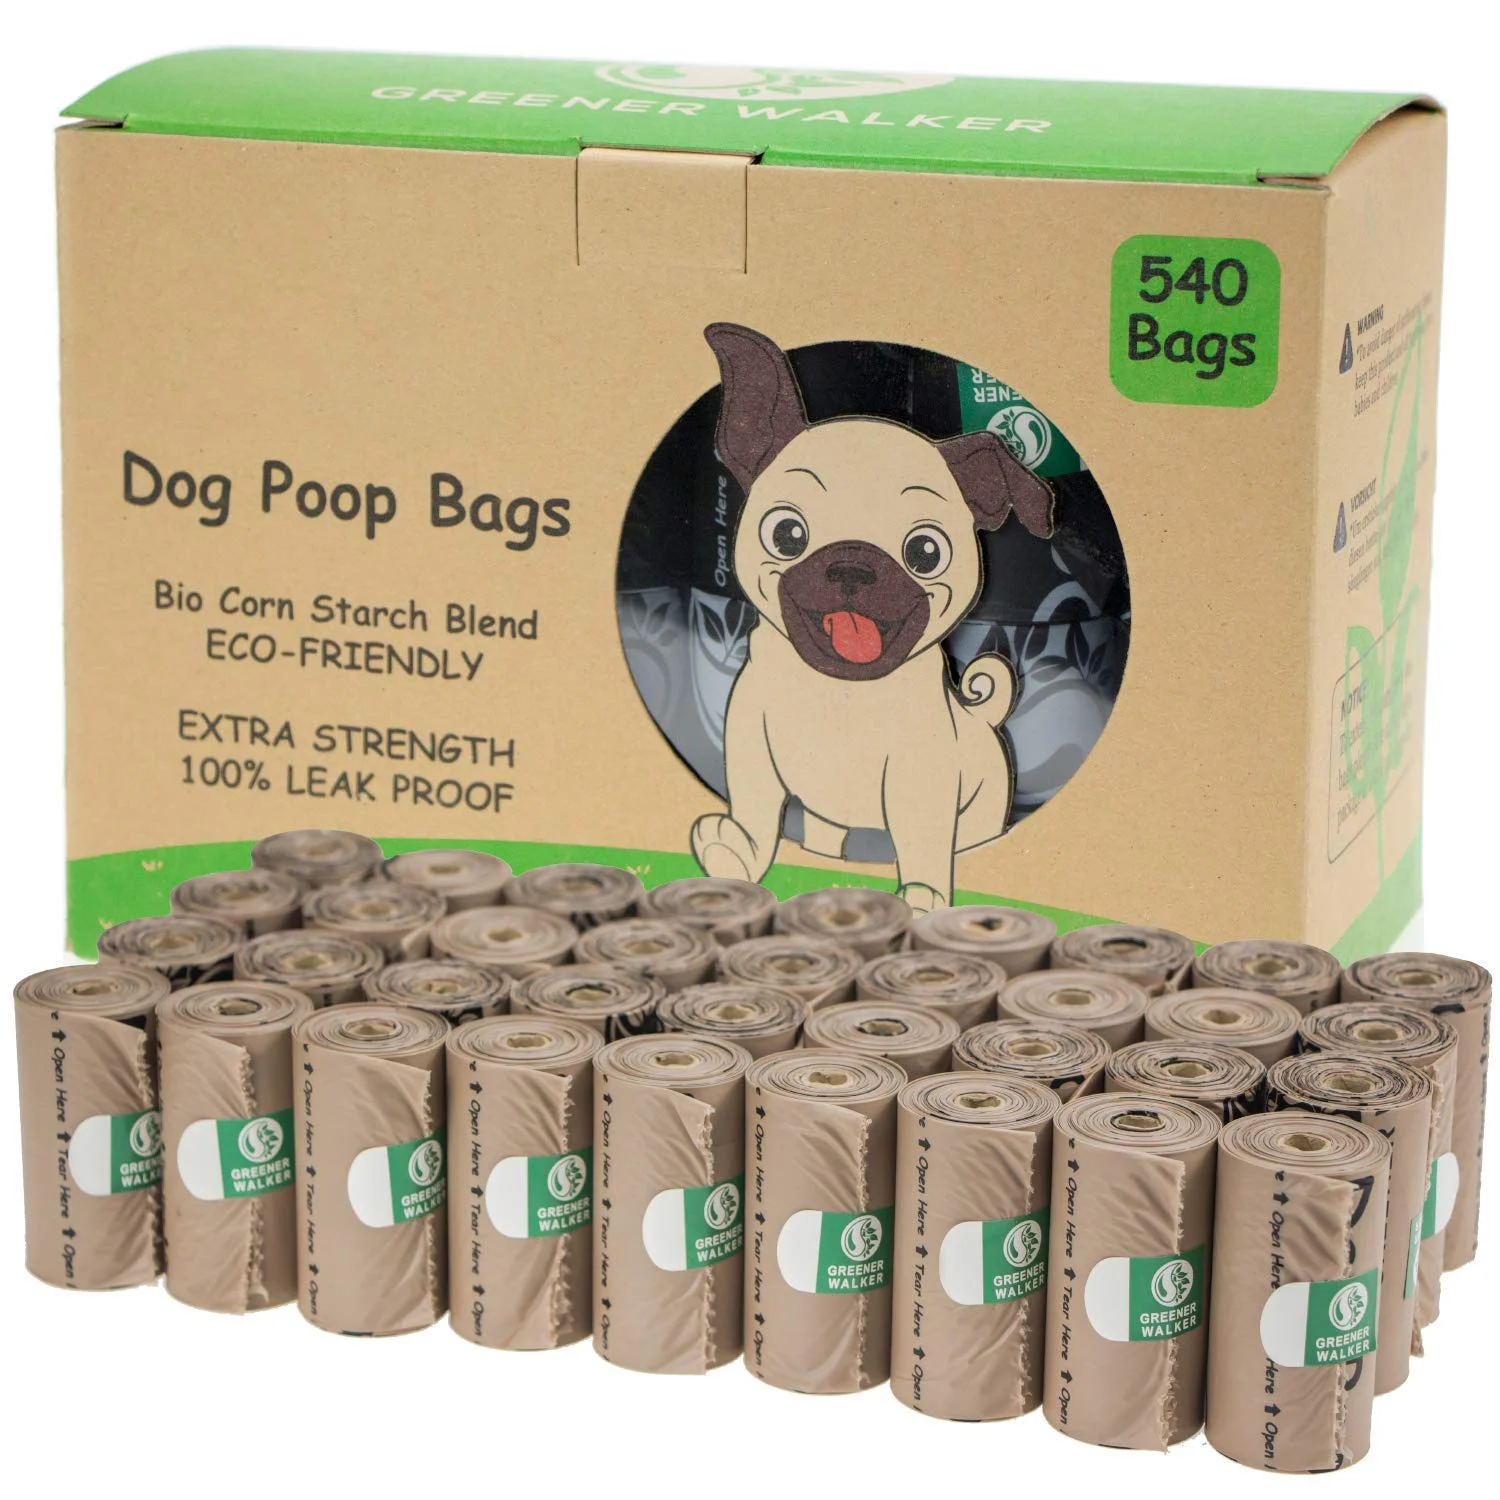 

Extra Thick Strong 100% Leak Proof Biodegradable Dog Waste Bags Dog Poop Bags for Dog